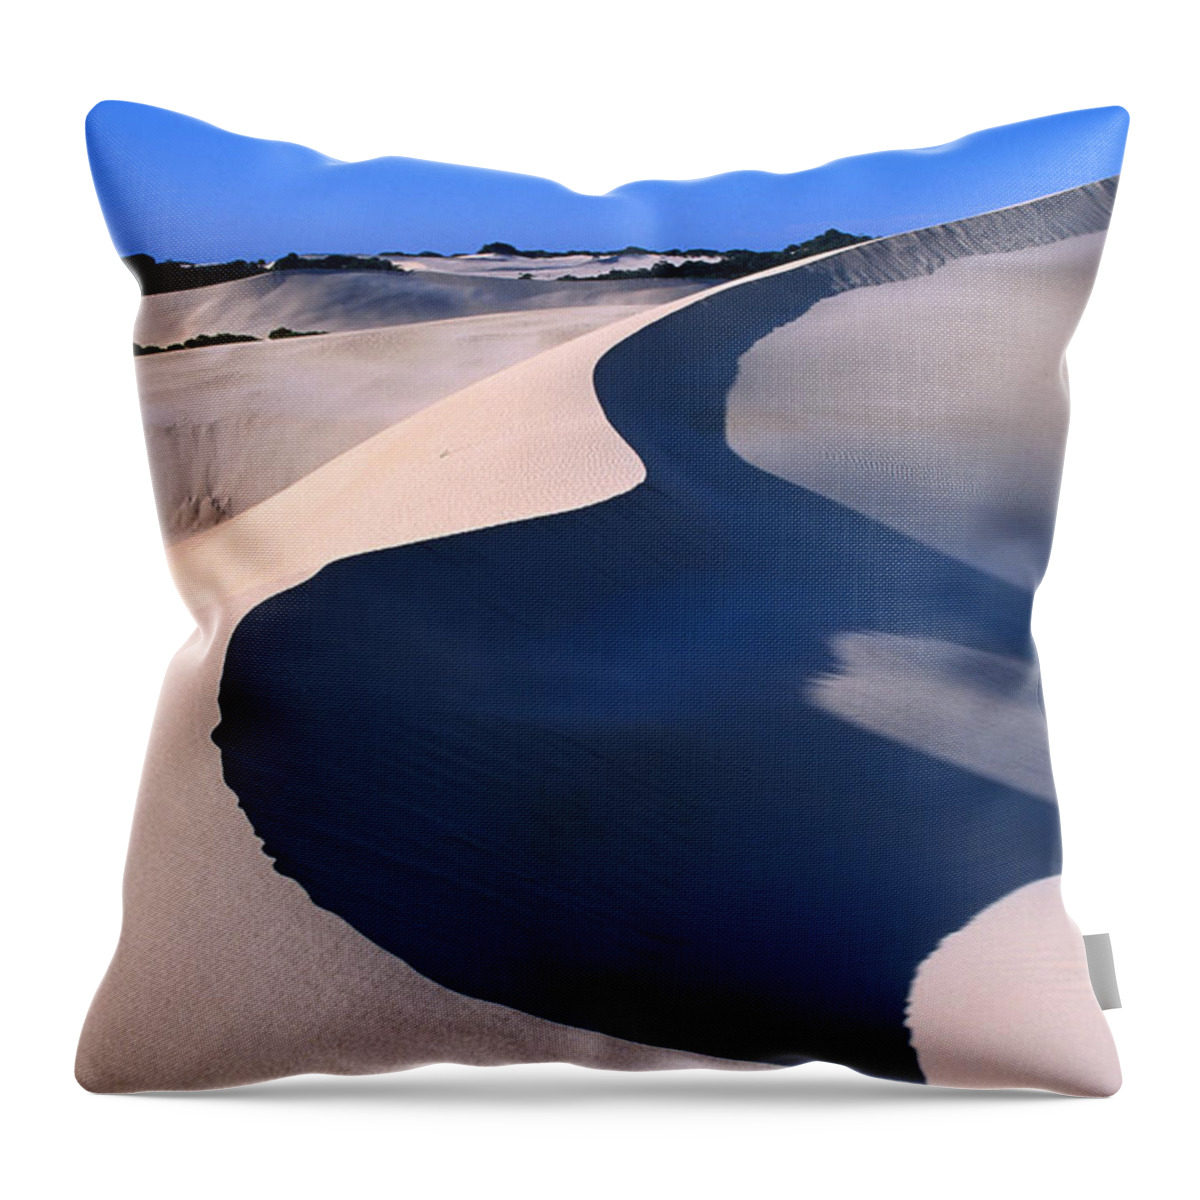 Kangaroo Island Throw Pillow featuring the photograph Animal Tracks In The Sand Of Little by John W Banagan